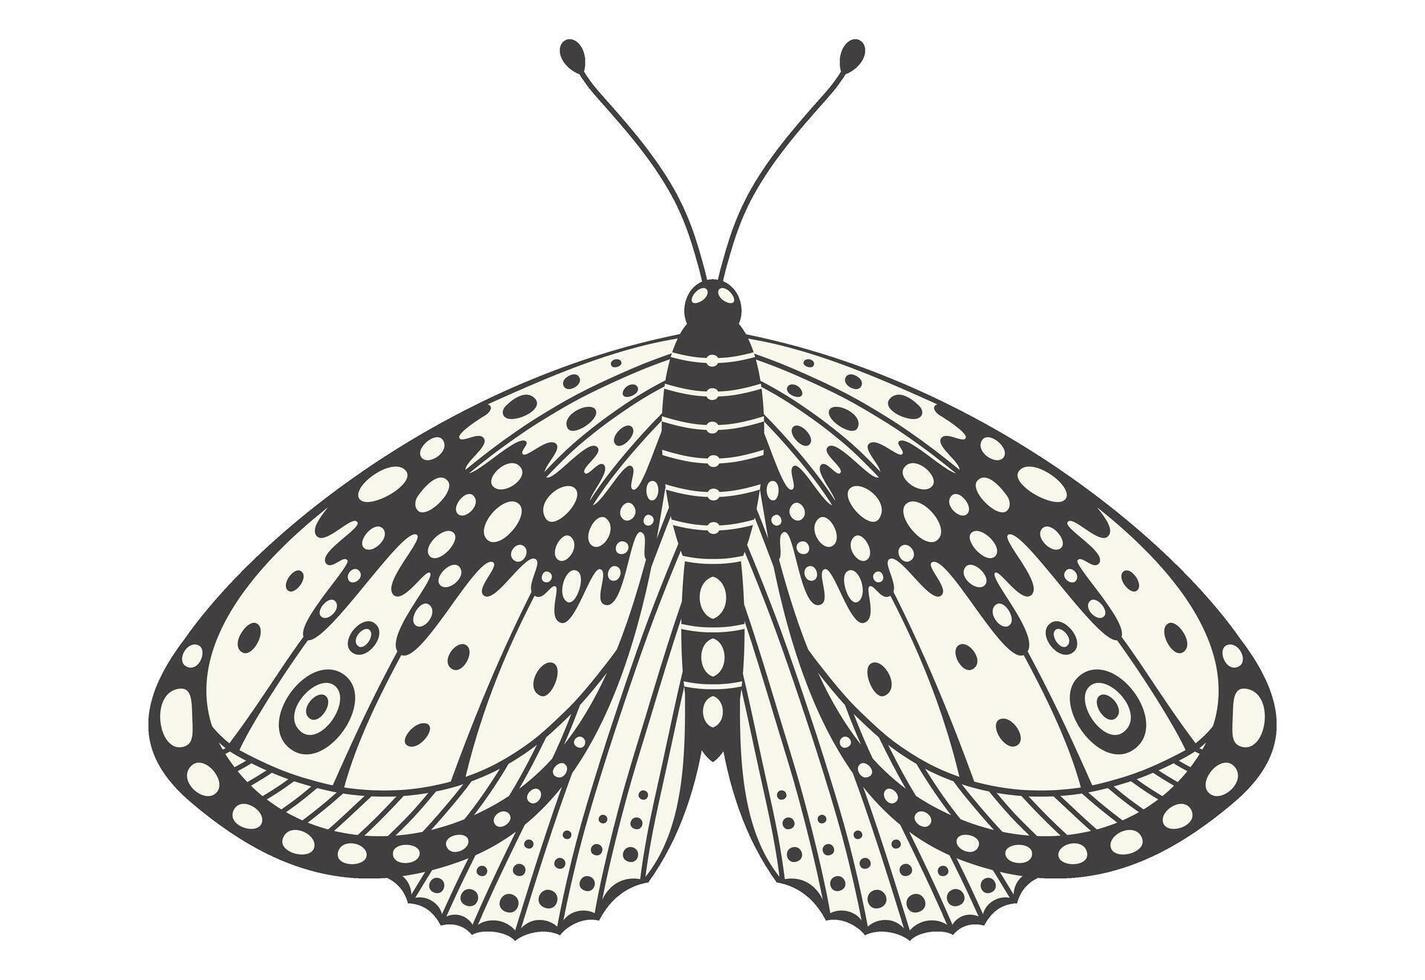 Moth or butterfly illustration. Y2k style aesthetic, wing shapes in front view, a magic ornamental symbol. Black and white element, tattoo graphic print with wave and dots abstract pattern, vector